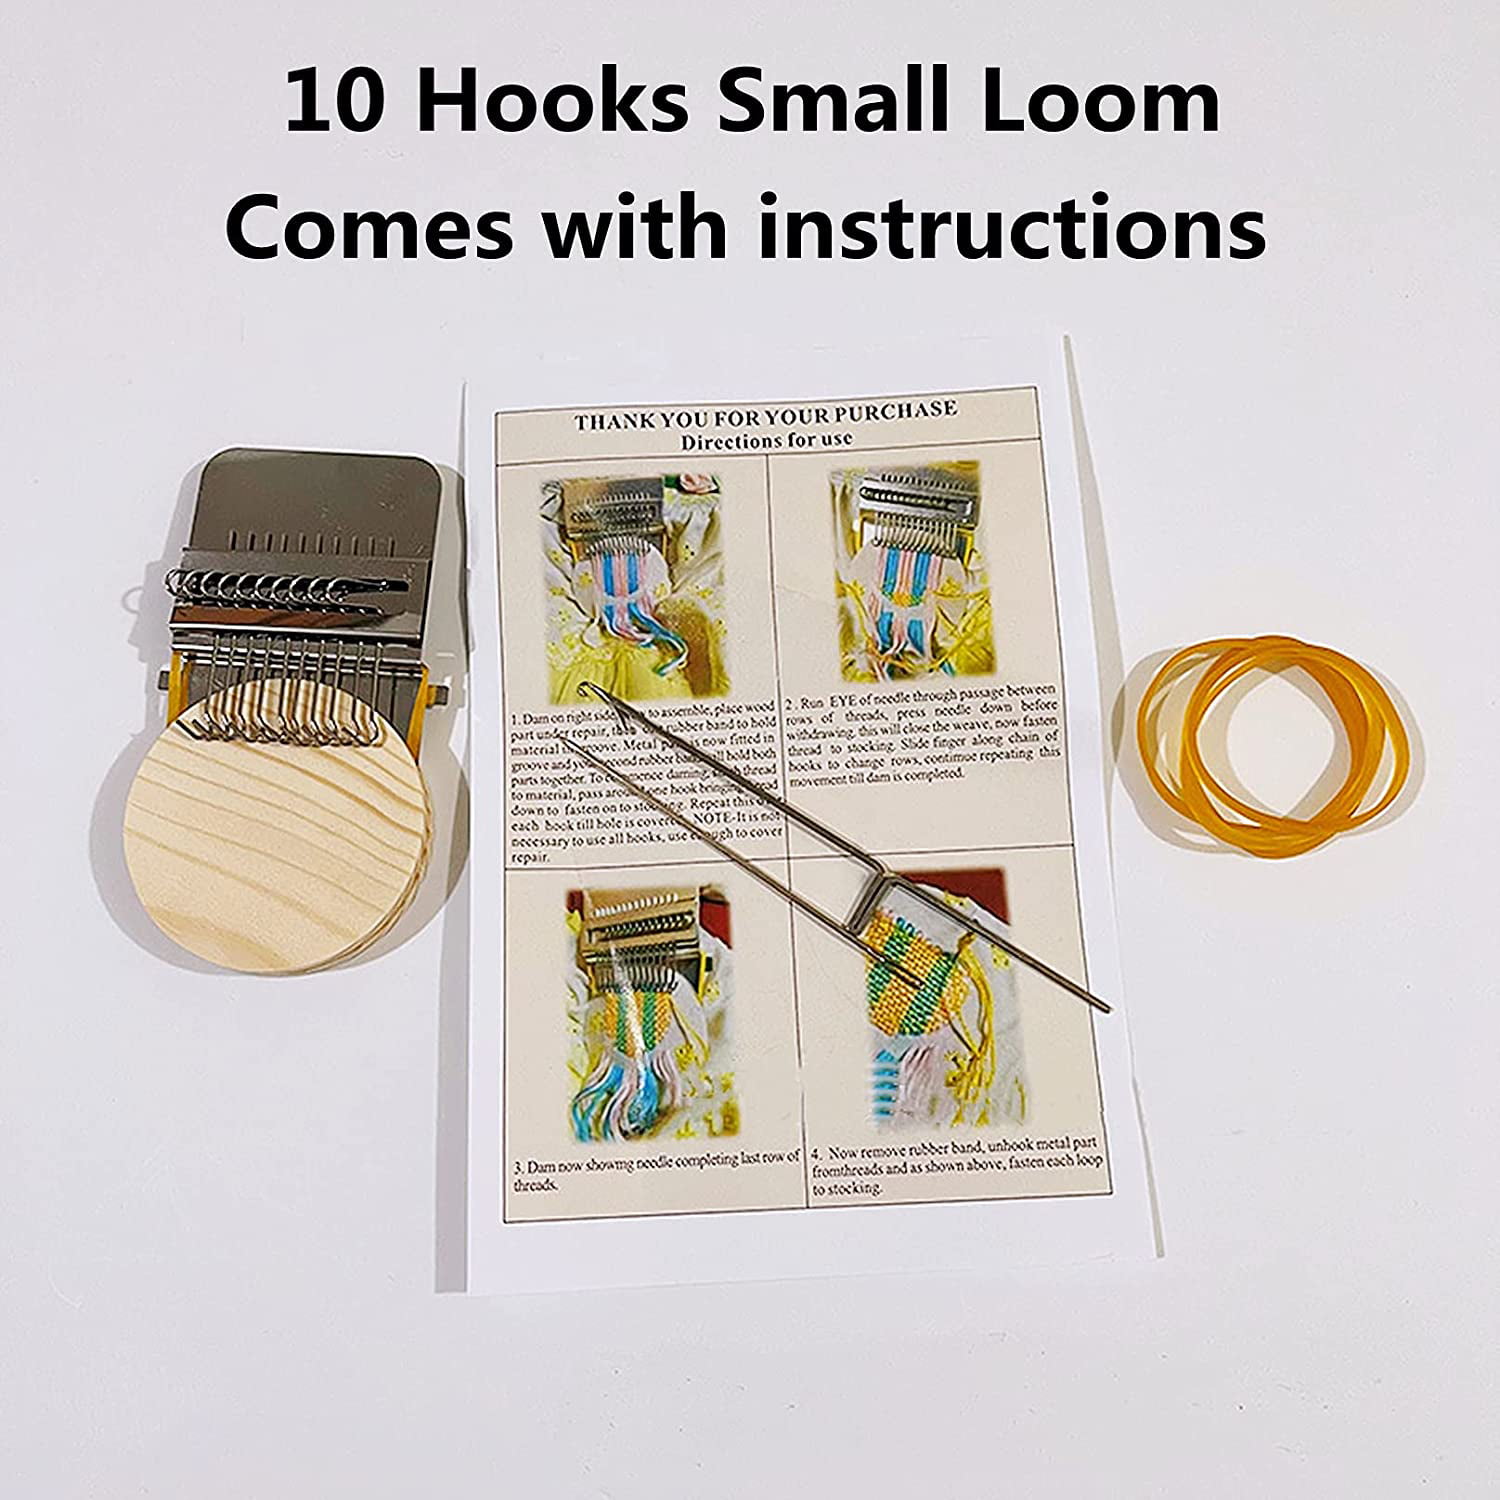 Beginners Wooden Loom Darning Machine Loom Socks and Clothes Quickly and Easily 28 Hooks Small Loom Speedweve Type Weave Tool Most Convenient Darning Loom for Mending Jeans 